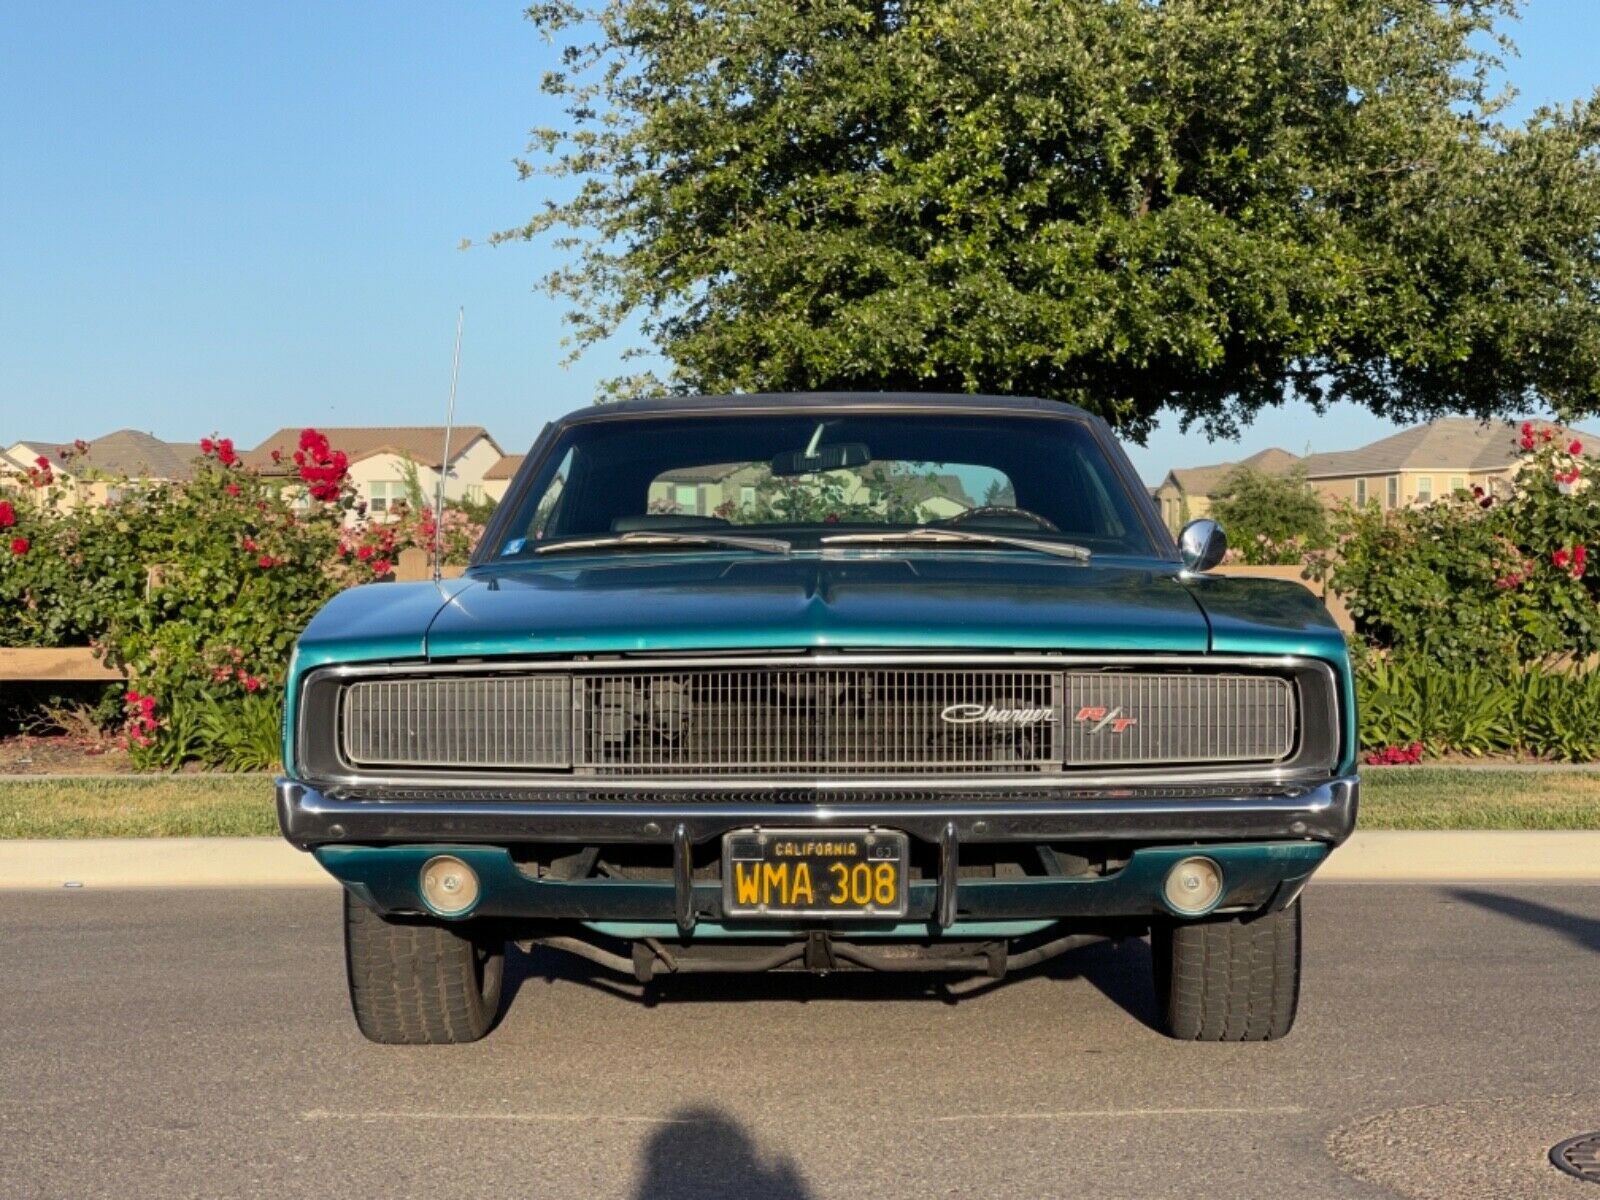 Unrestored 1968 Dodge Charger R T 440 Has Just 26k Miles Survived Engine Fire Autoevolution